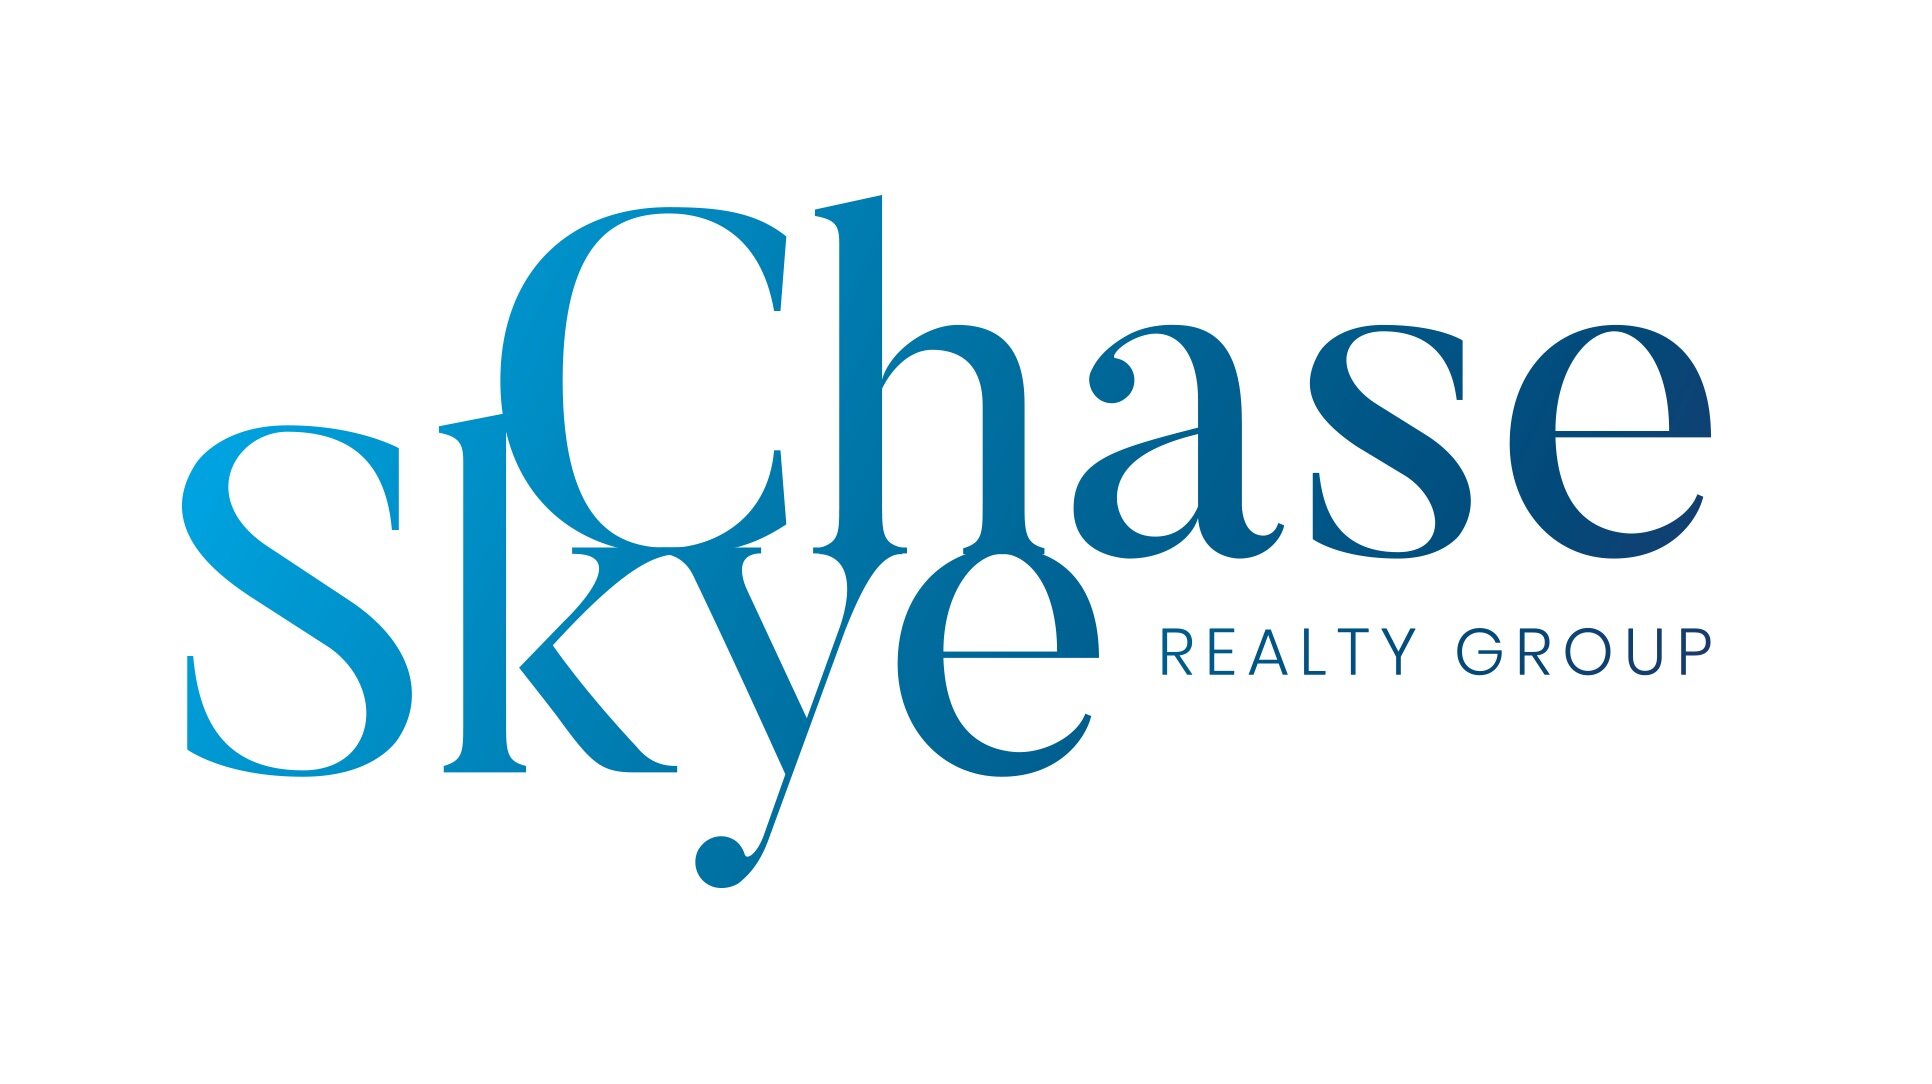 Chase Skye Realty Group